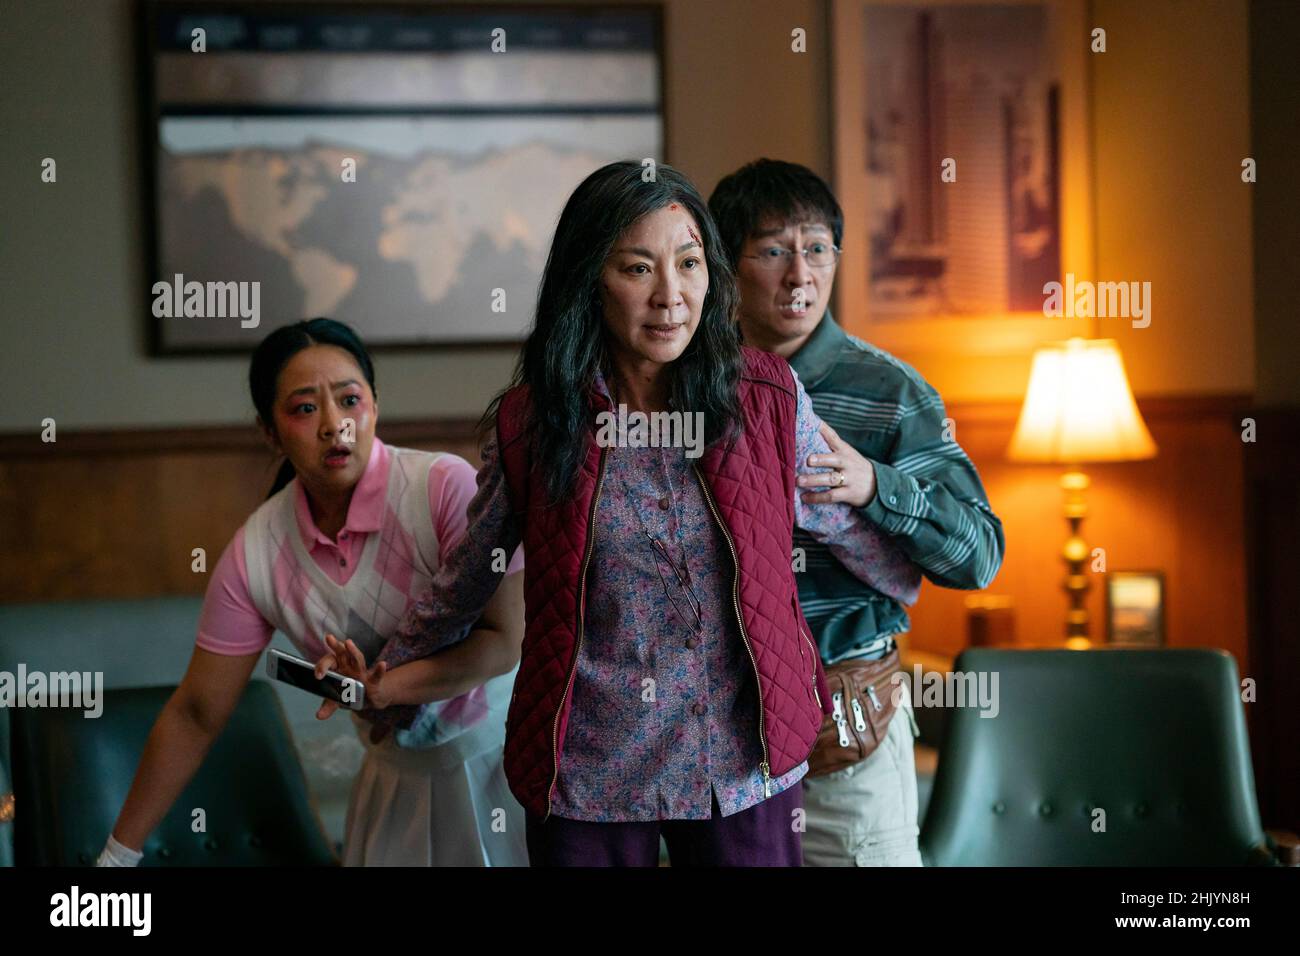 Everything Everywhere All at Once (2022) directed by Dan Kwan and Daniel Scheinert and starring Michelle Yeohm, James Hong and Jenny Slate. An aging Chinese immigrant is swept up in an insane adventure, where she alone can save the world by exploring other universes connecting with the lives she could have led. Stock Photo